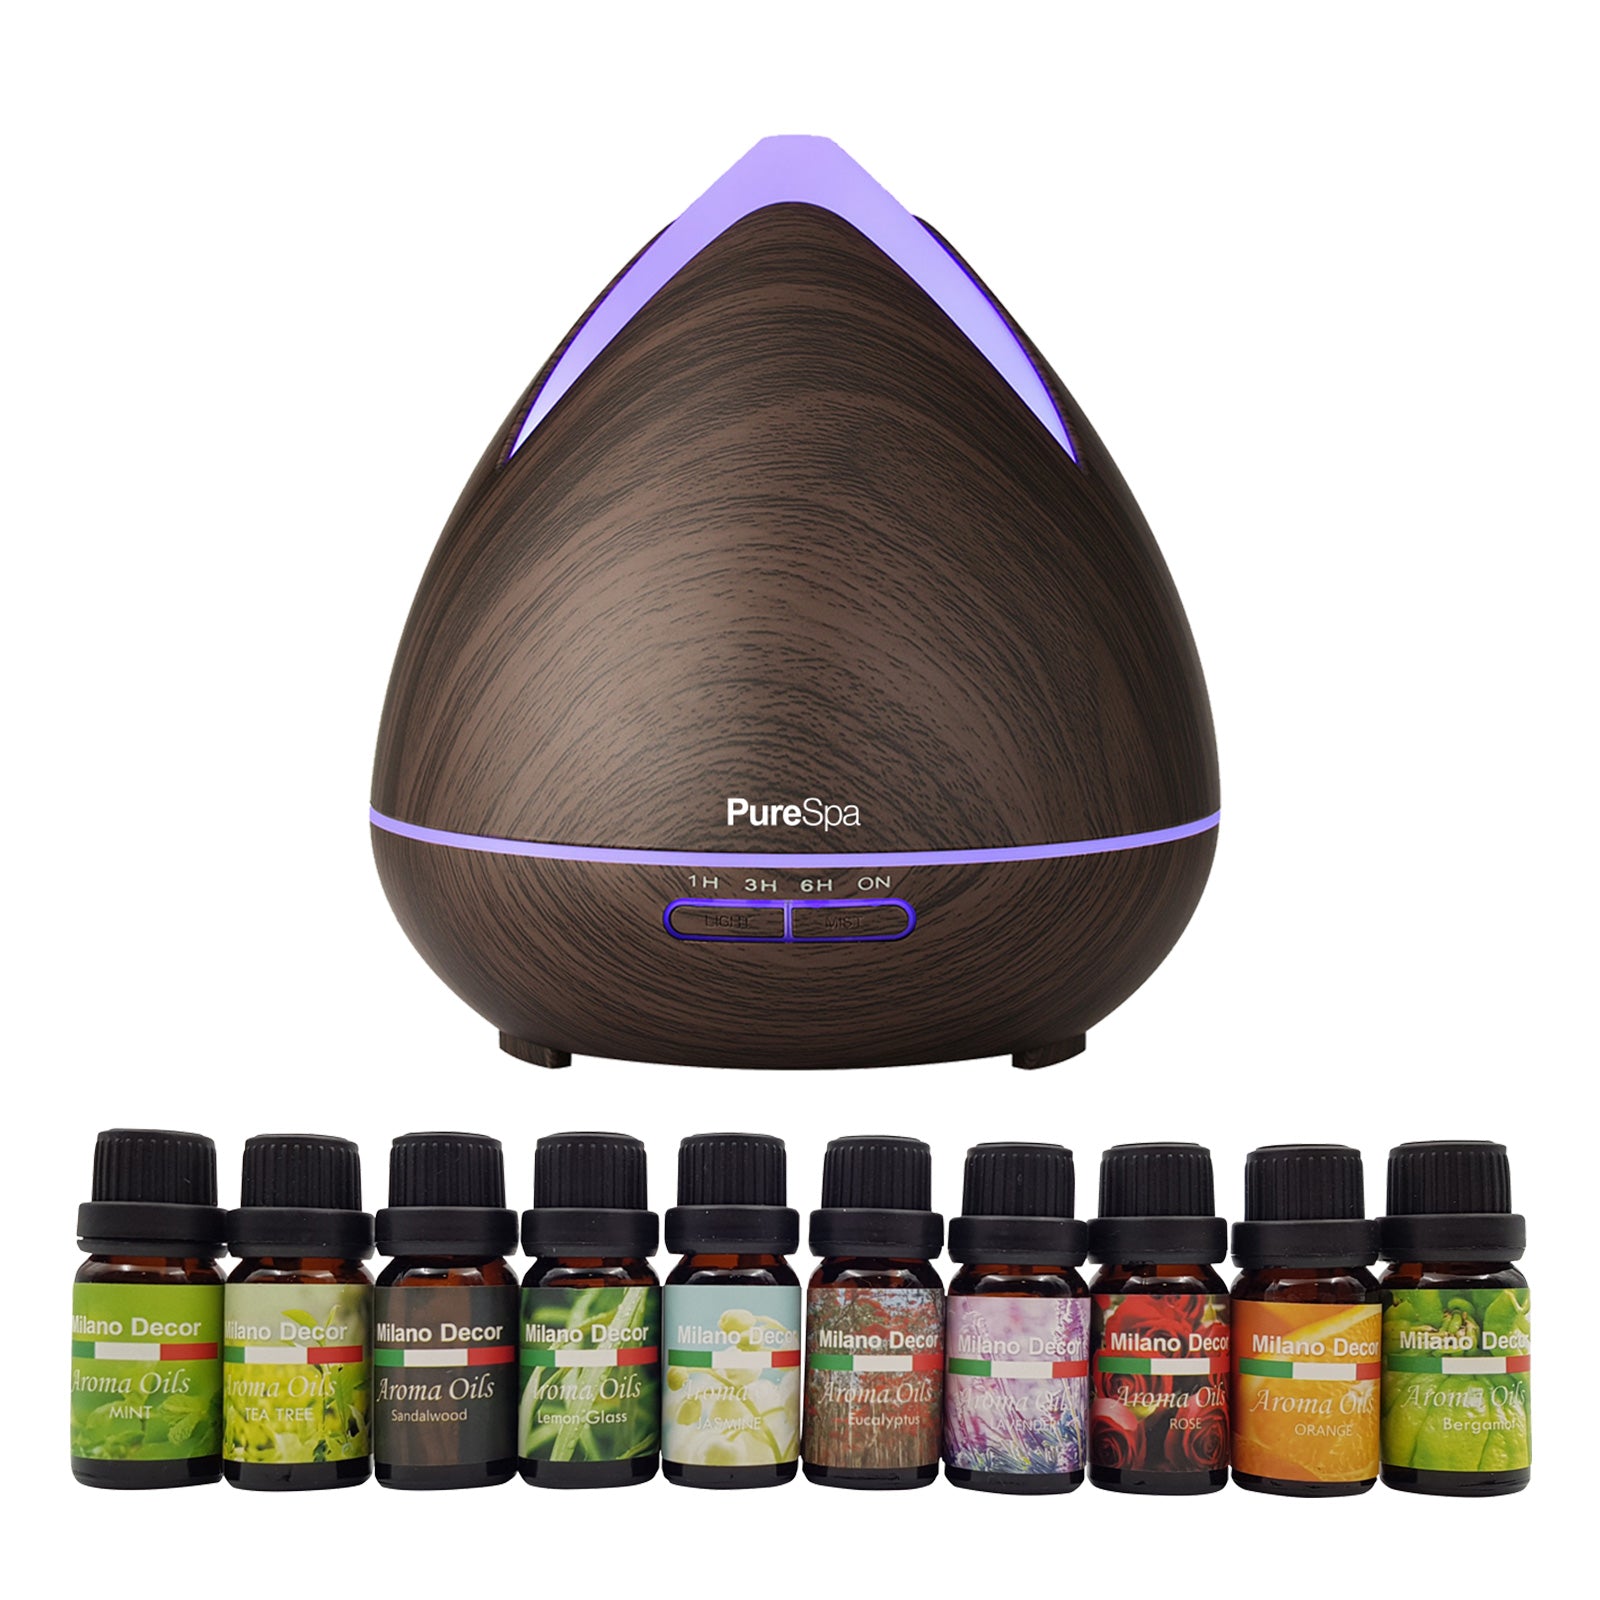 Purespa Diffuser Set With 10 Pack Diffuser Oils Humidifier Aromatherapy - Dark Wood Deals499